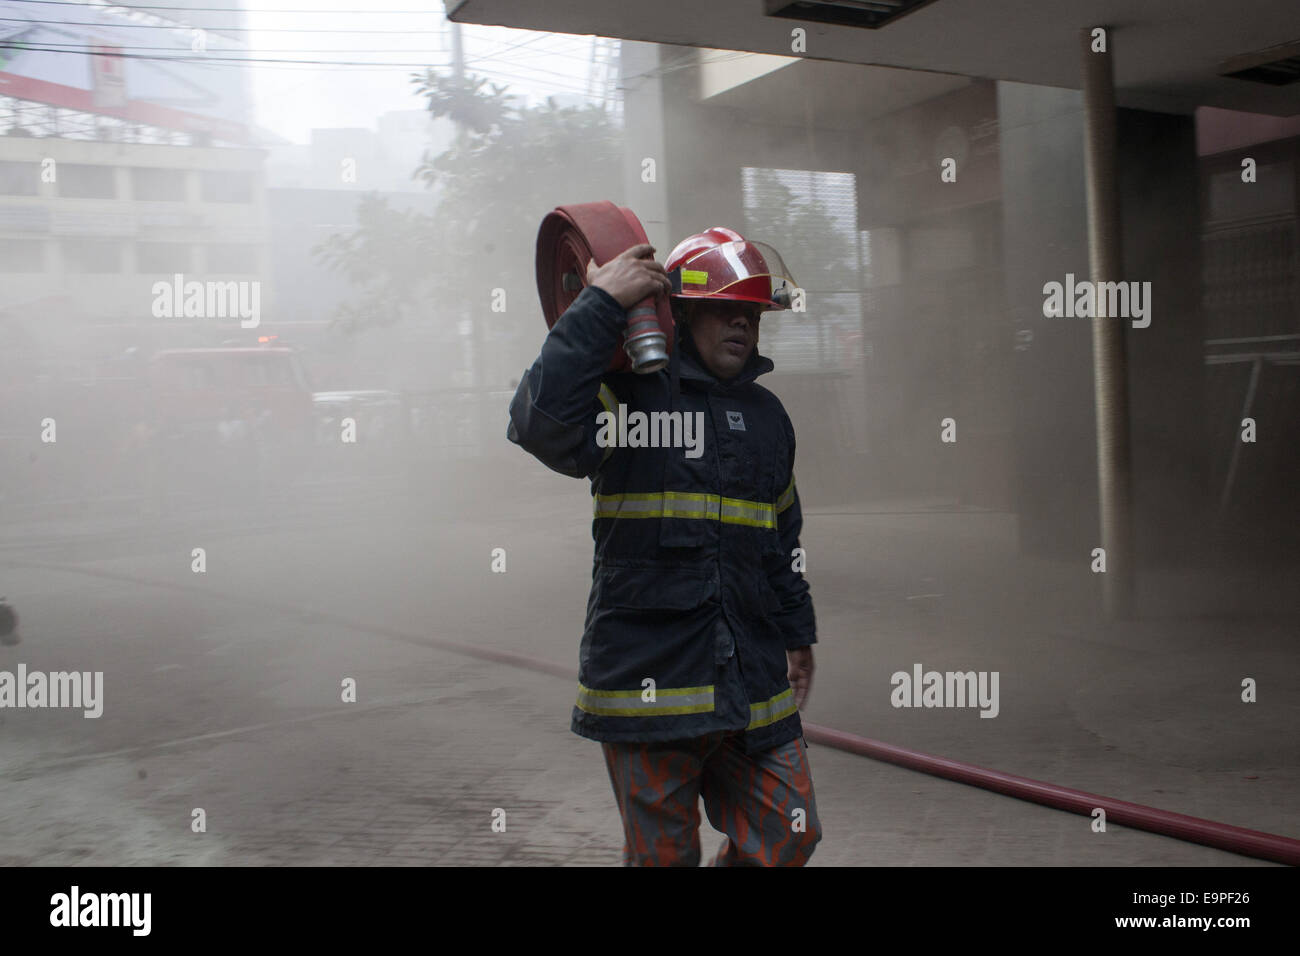 Dhaka, Bangladesh. 31st Oct, 2014. A fire man going to enter the building with water pipe.A devastating fire has broken out in the office of Bangla national daily Amar Desh housed at Bangladesh Steel and Engineering Corporation (BSEC) building in the capital's Kawran Bazar.Fire service sources said a total of 20 fire fighting units rushed to the scene, and are trying to bring the blaze under control.Earlier on Feb 26, 2007, offices of 10 institutions including media units the NTV, RTV and Amar Desh were destroyed in a fire incident at the same building. (Credit Image: © Zakir Hossain Chowd Stock Photo